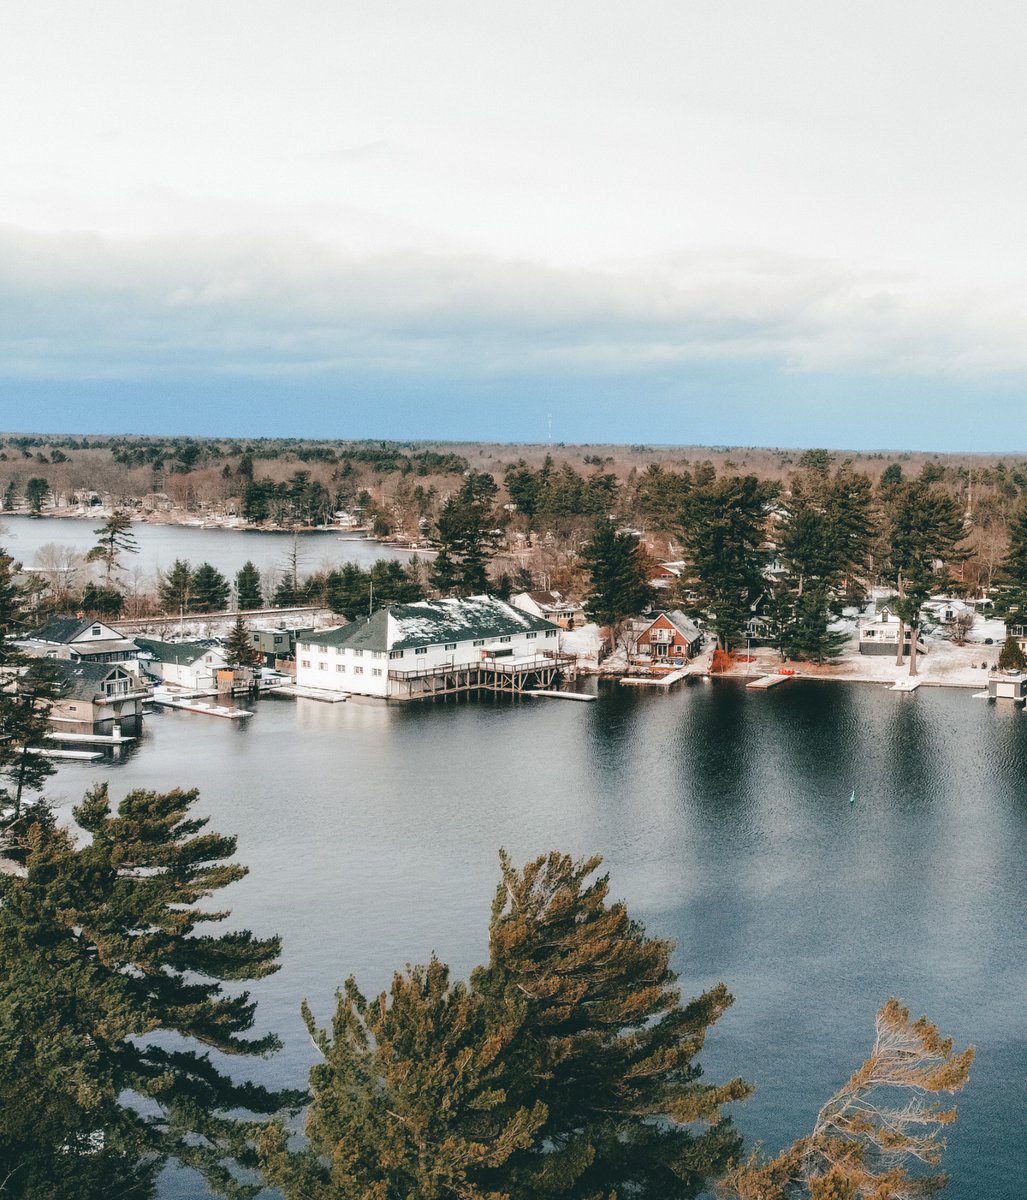 Took a quick flight over Bala today before the wind picked up something fierce 💨
📍Bala, Ontario 🇨🇦 
#djiphotography #shotondji #dronephotography #droneshots #winterdrone #droneontario #dronecanada #womenwhodrone #droneoftheday